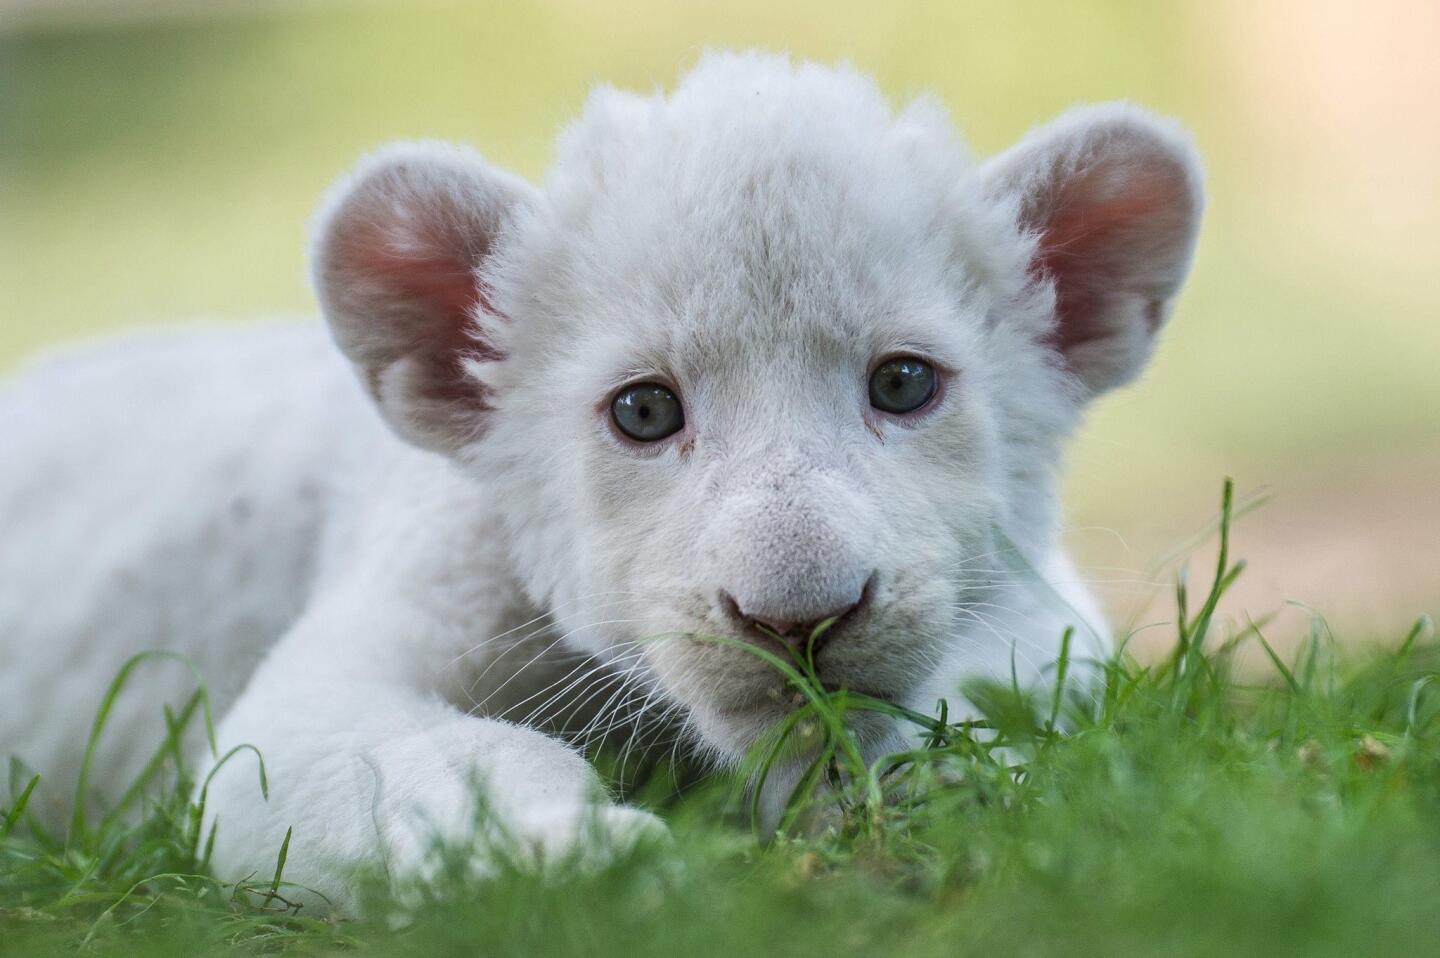 Zahra, a four-week-old female white lion cub rests in her enlosure in Magan Zoo, a privately owned animal park, in Felsolajos, Hungary, on June 30, 2016. Zahra, who was born into a litter of four, was rejected by her mother because of an infectious disease.